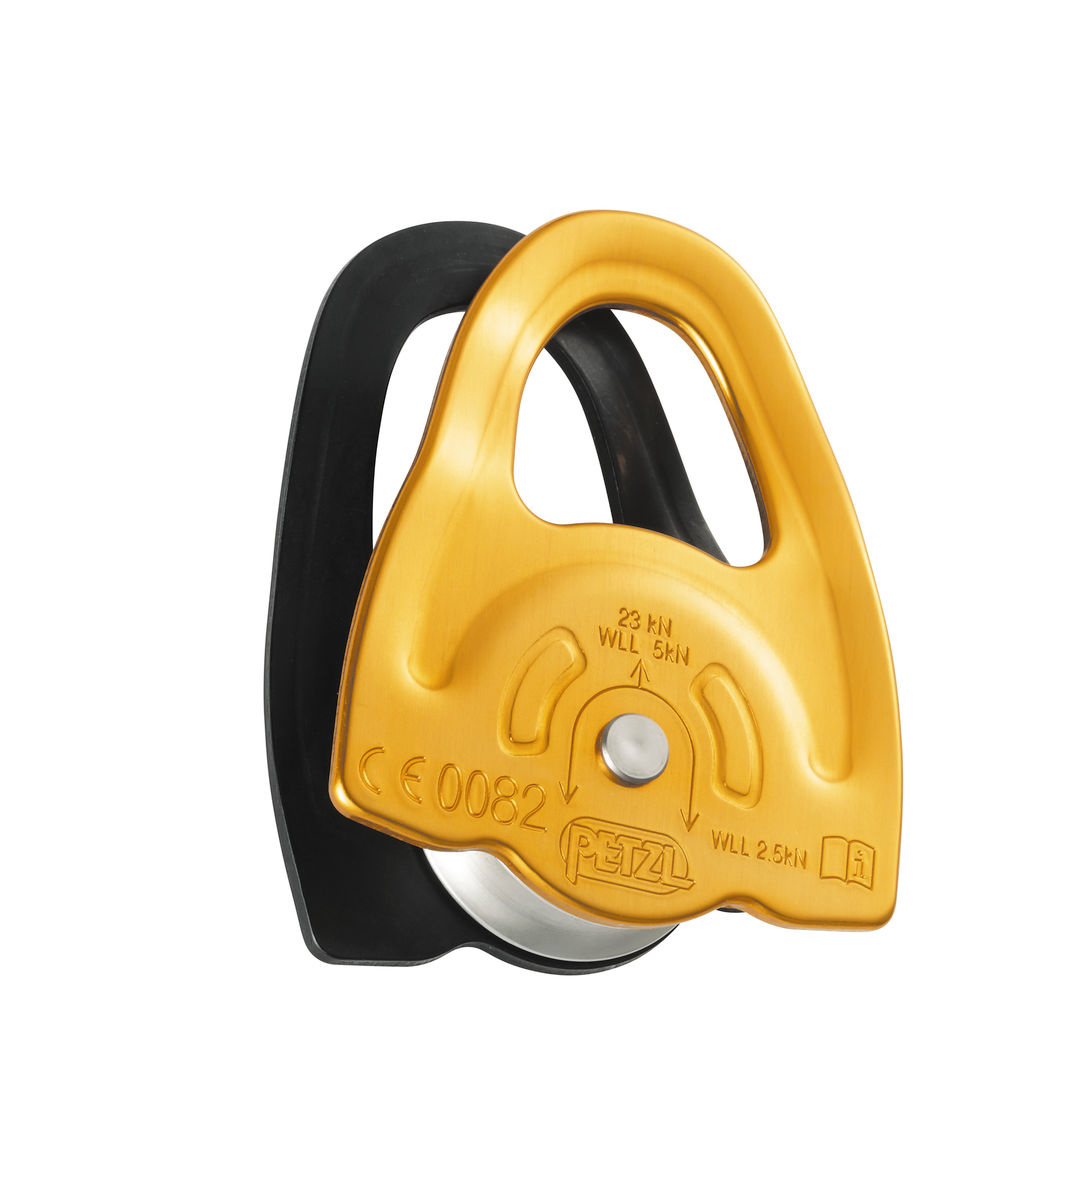 Petzl Mini Prussic Minding Pulley